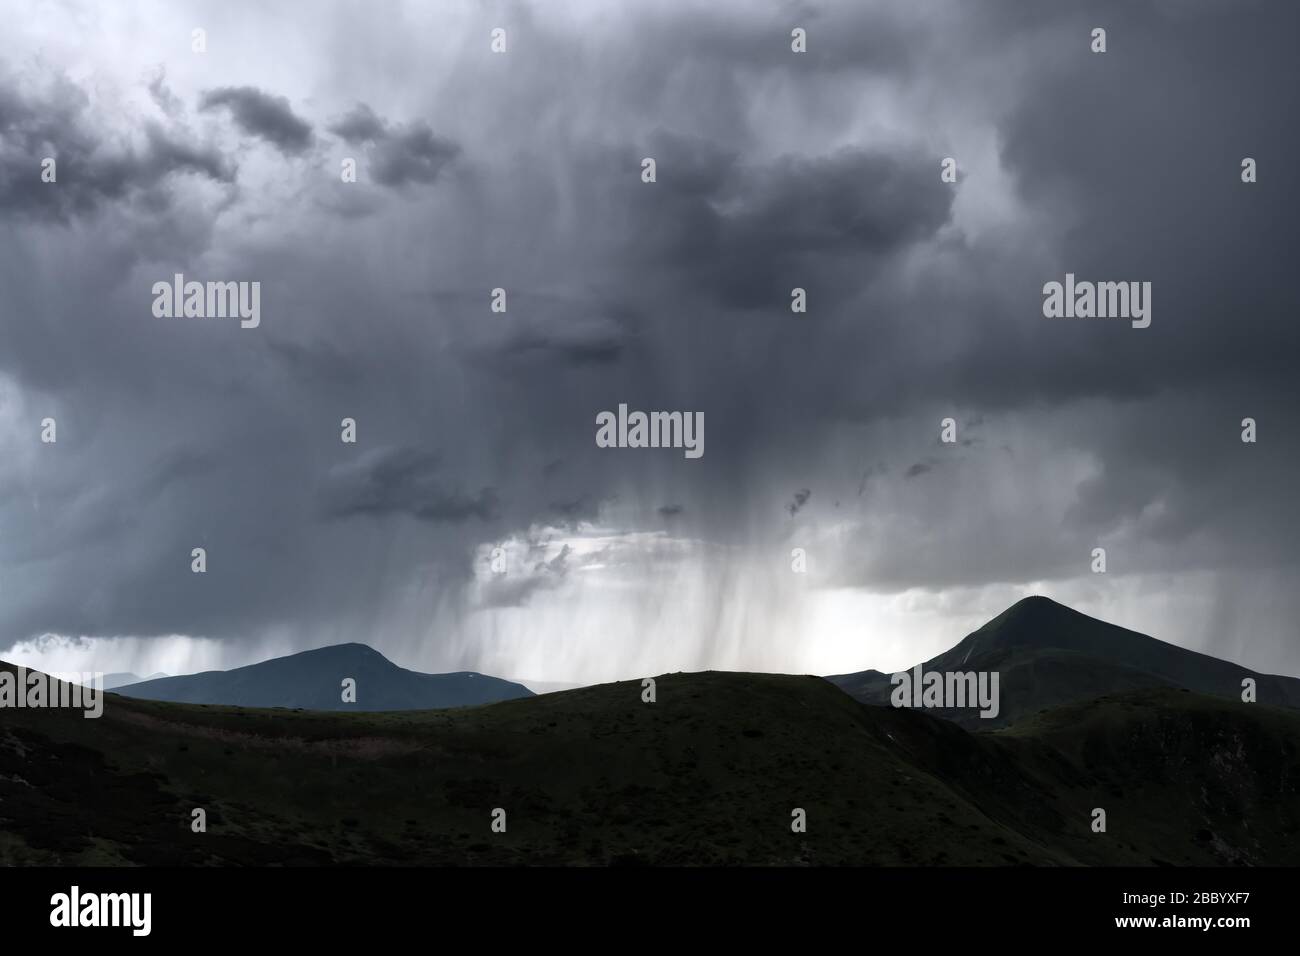 Amazing flowing rainy clouds in evening mountains. Beautiful nature of Carpathians. Landscape photography Stock Photo